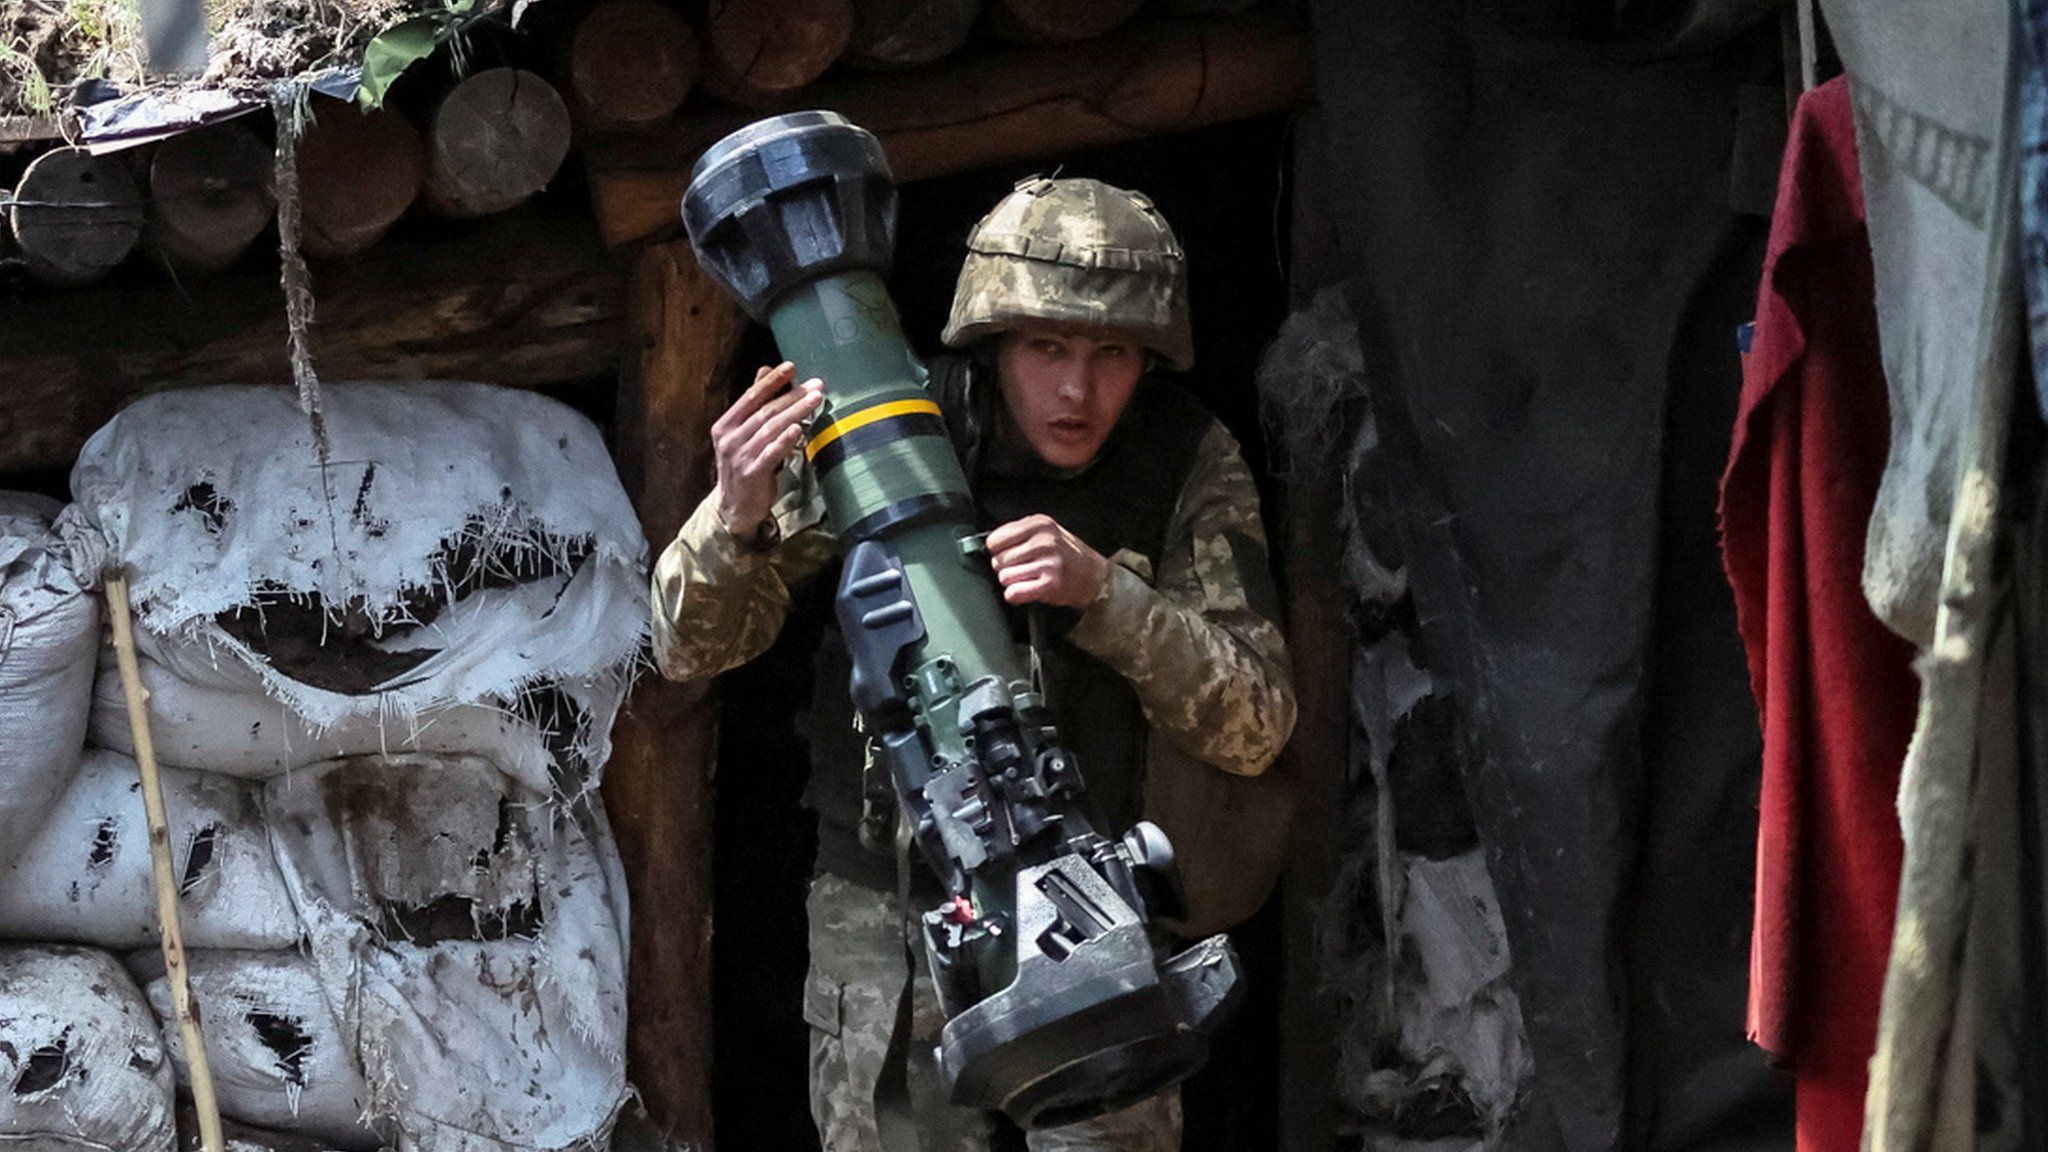 A Ukranian service member holding a next generation light anti-tank weapon (NLAW) near the front line